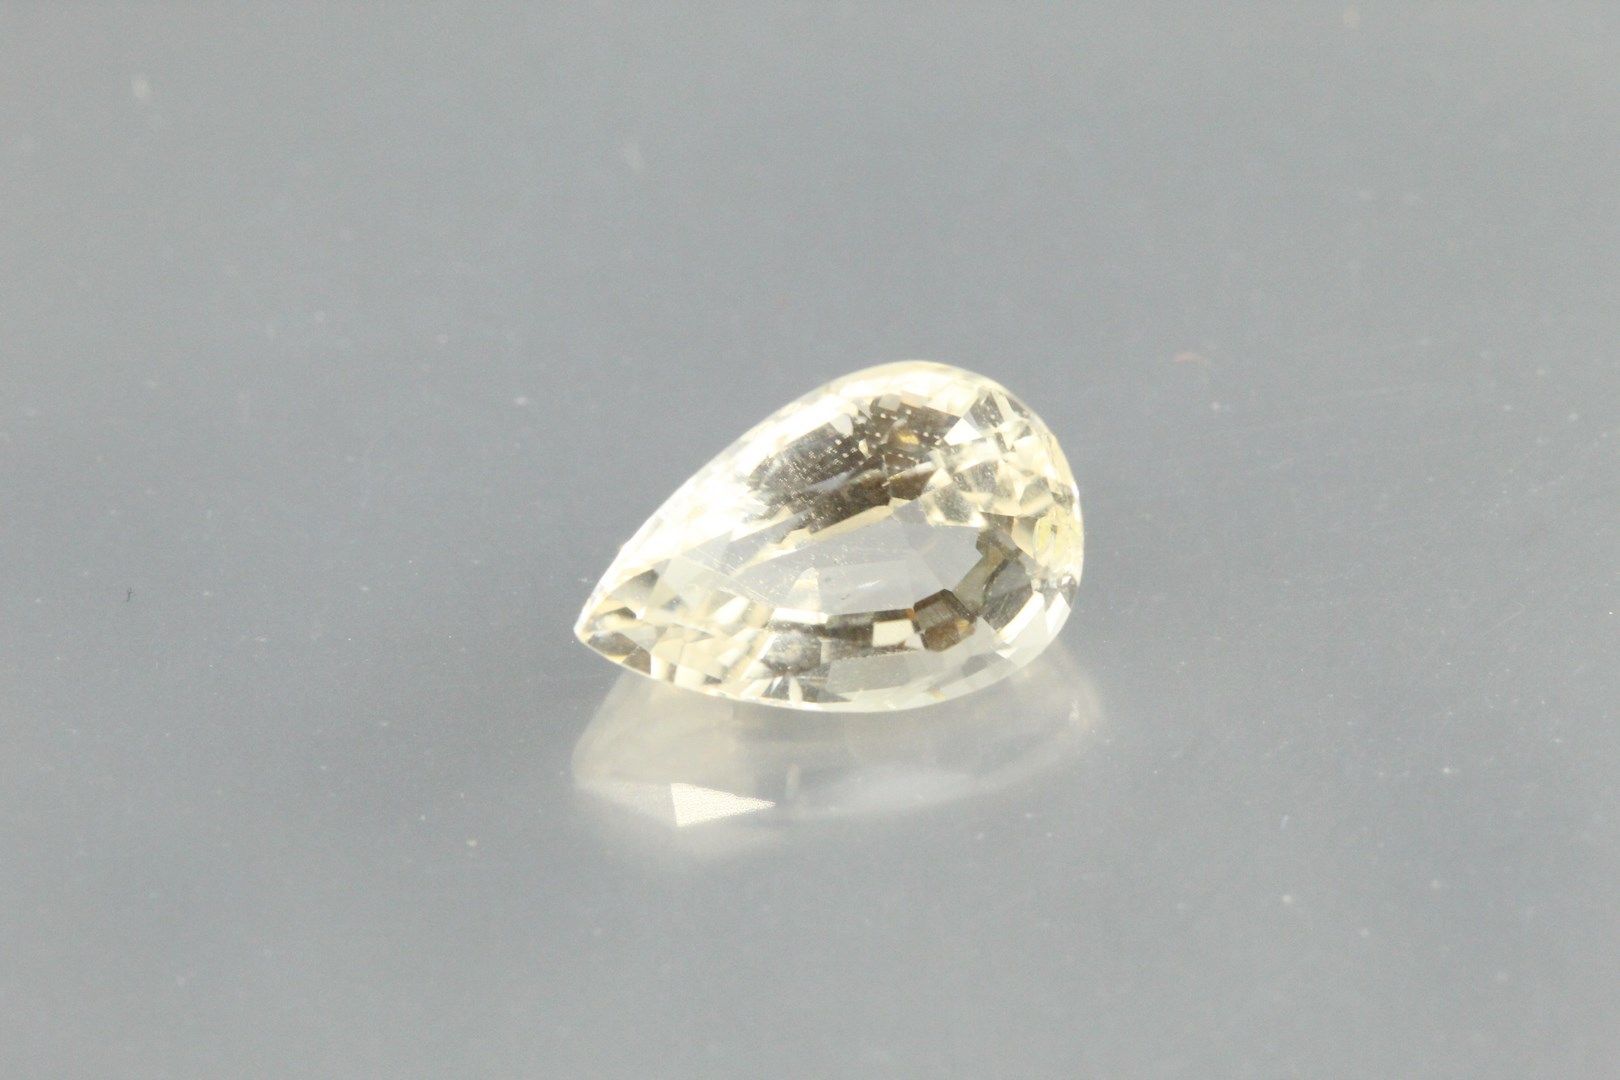 Null Scapolite yellow pear on paper.

Weight: 2, 10 cts. 

Scratches and plane o&hellip;